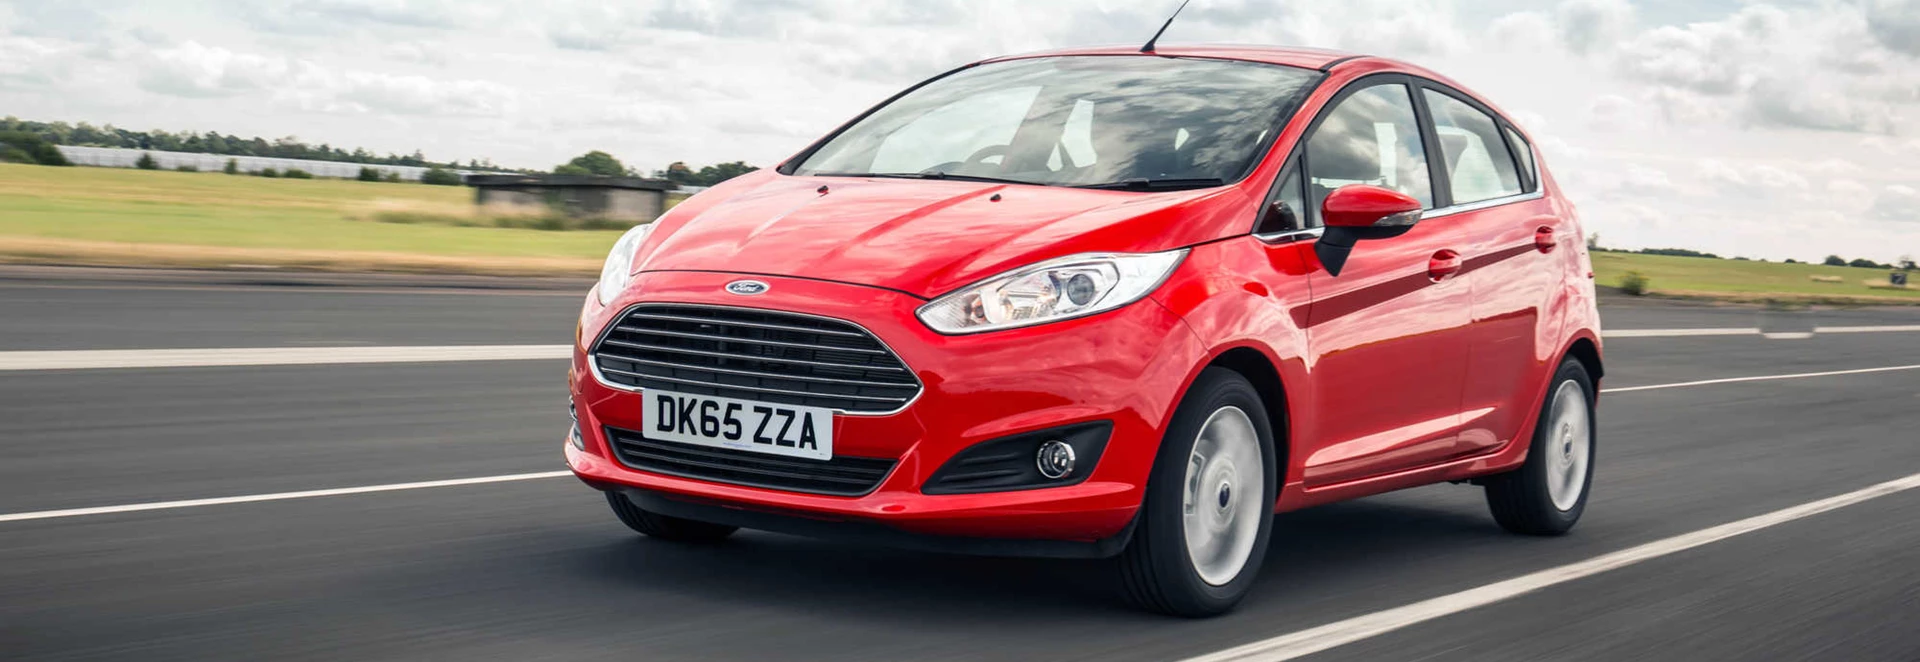 Ford Fiesta hatchback review 